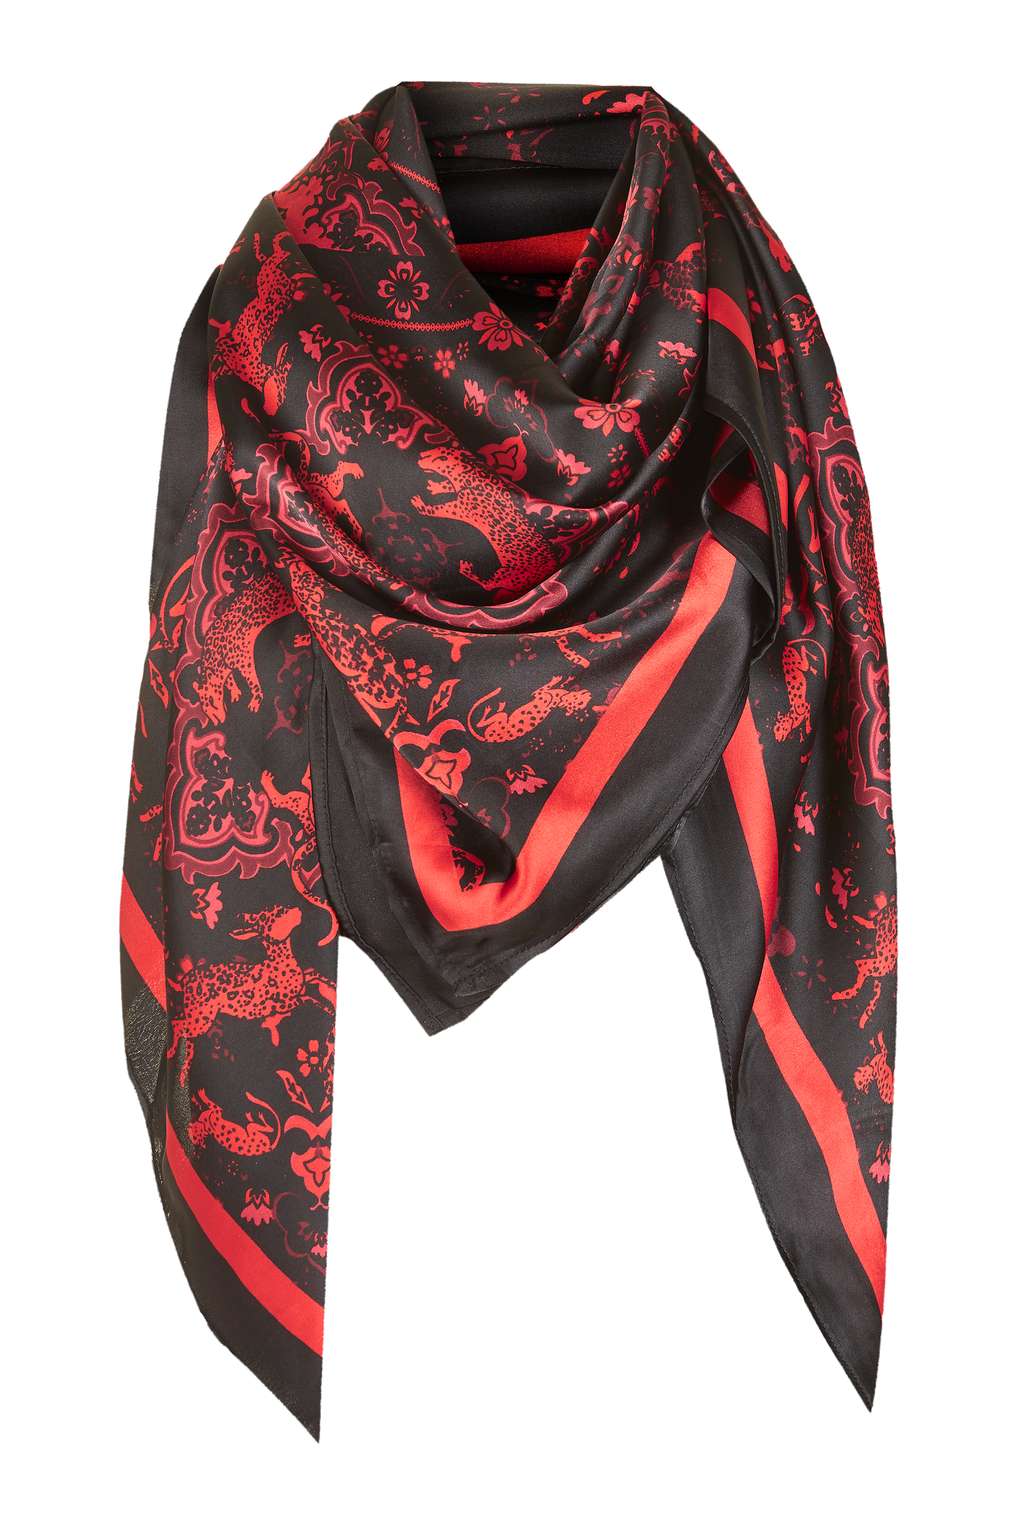 Topshop Oversized Silky Tiger Print Scarf